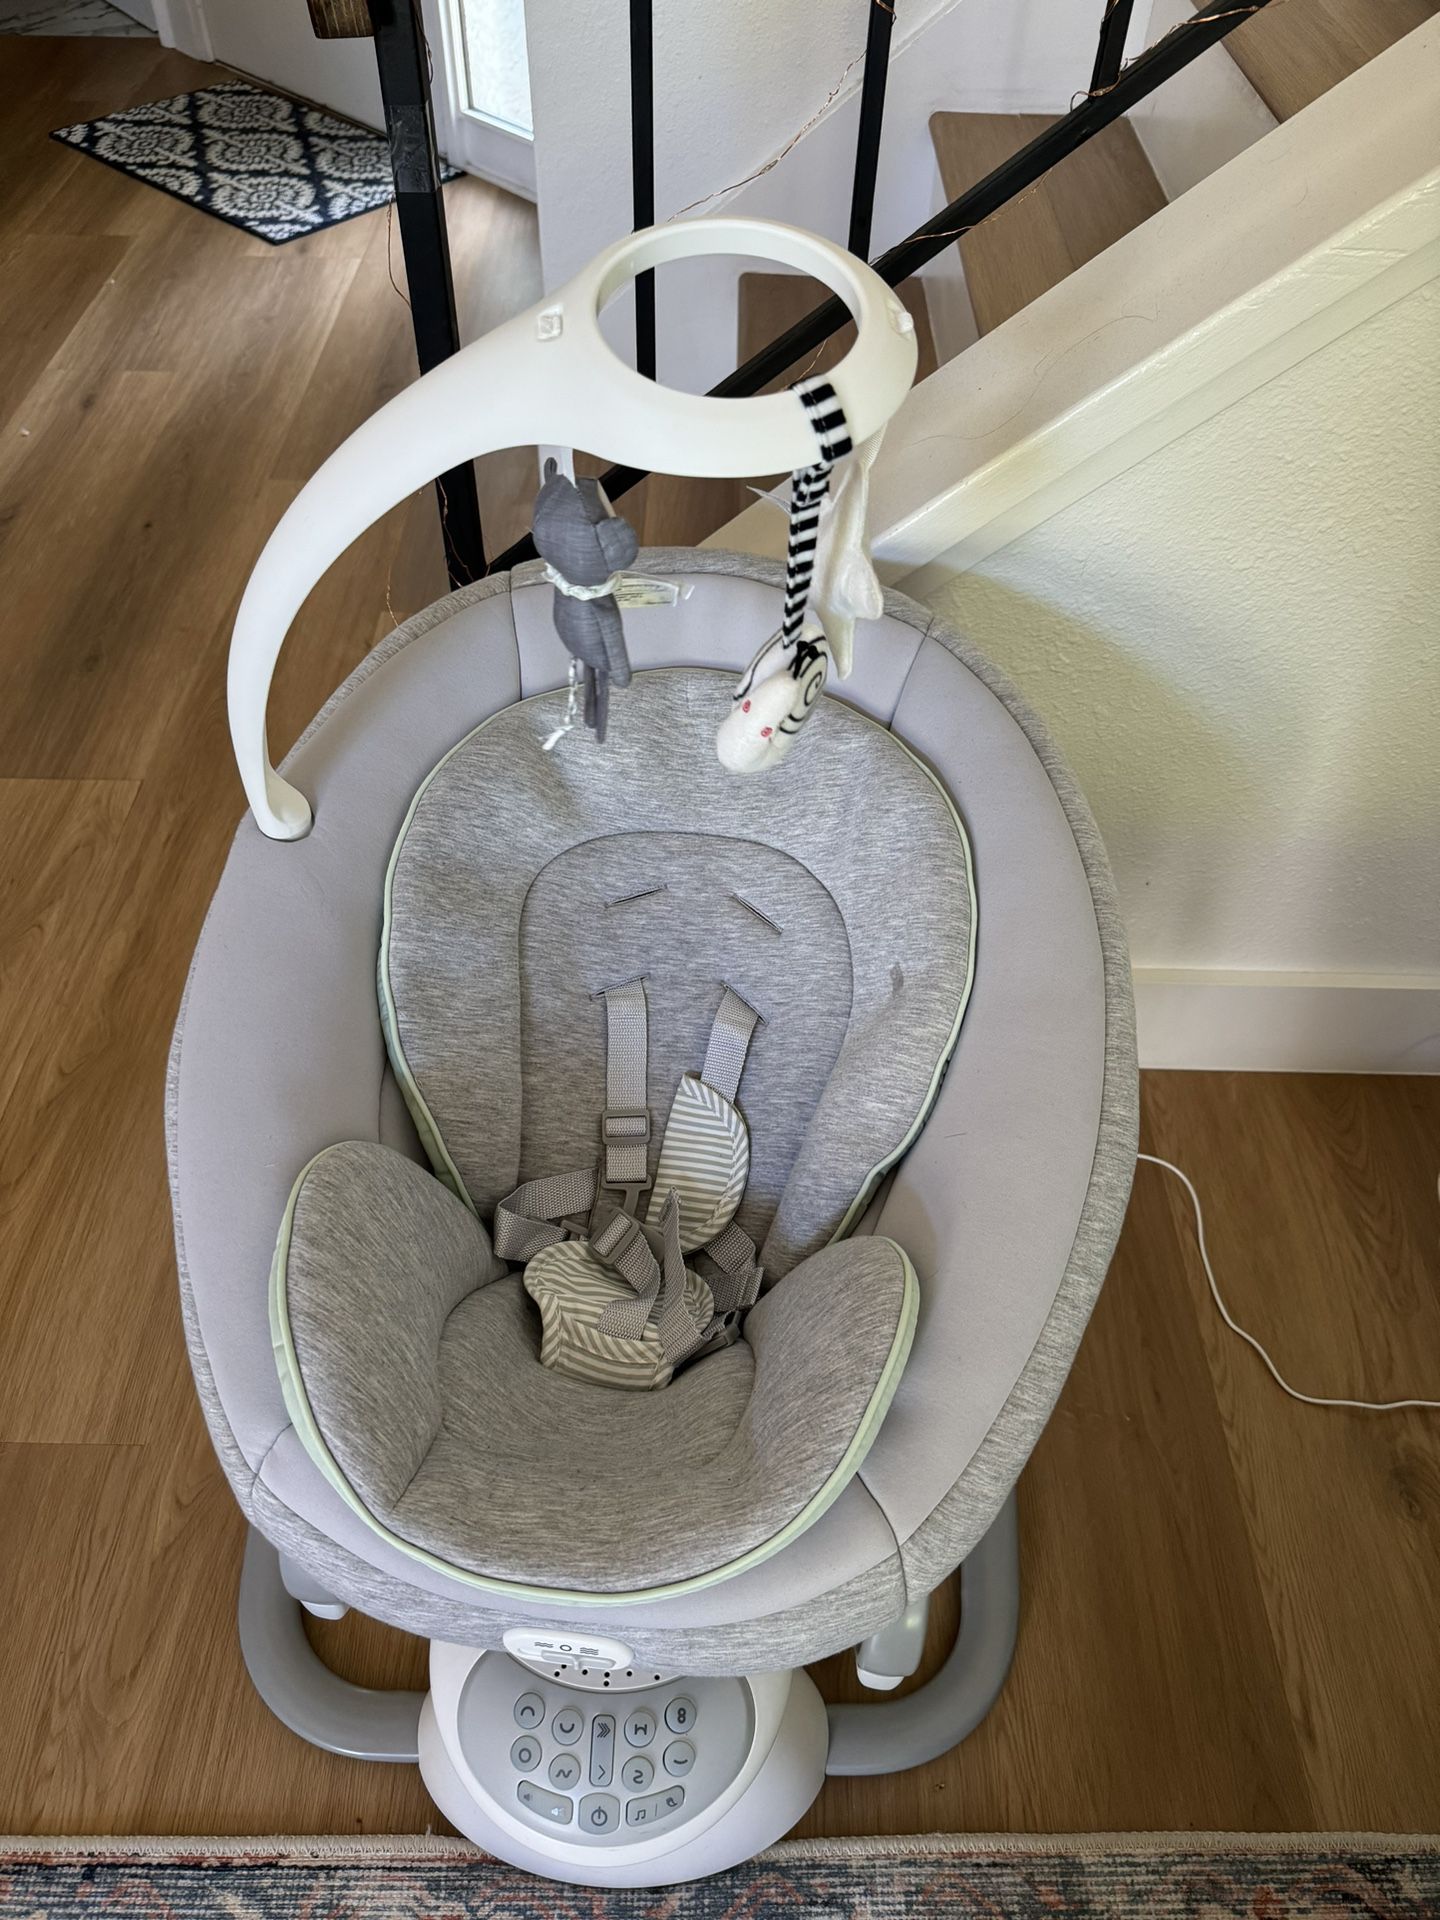 Graco Soothe My Way baby Swing